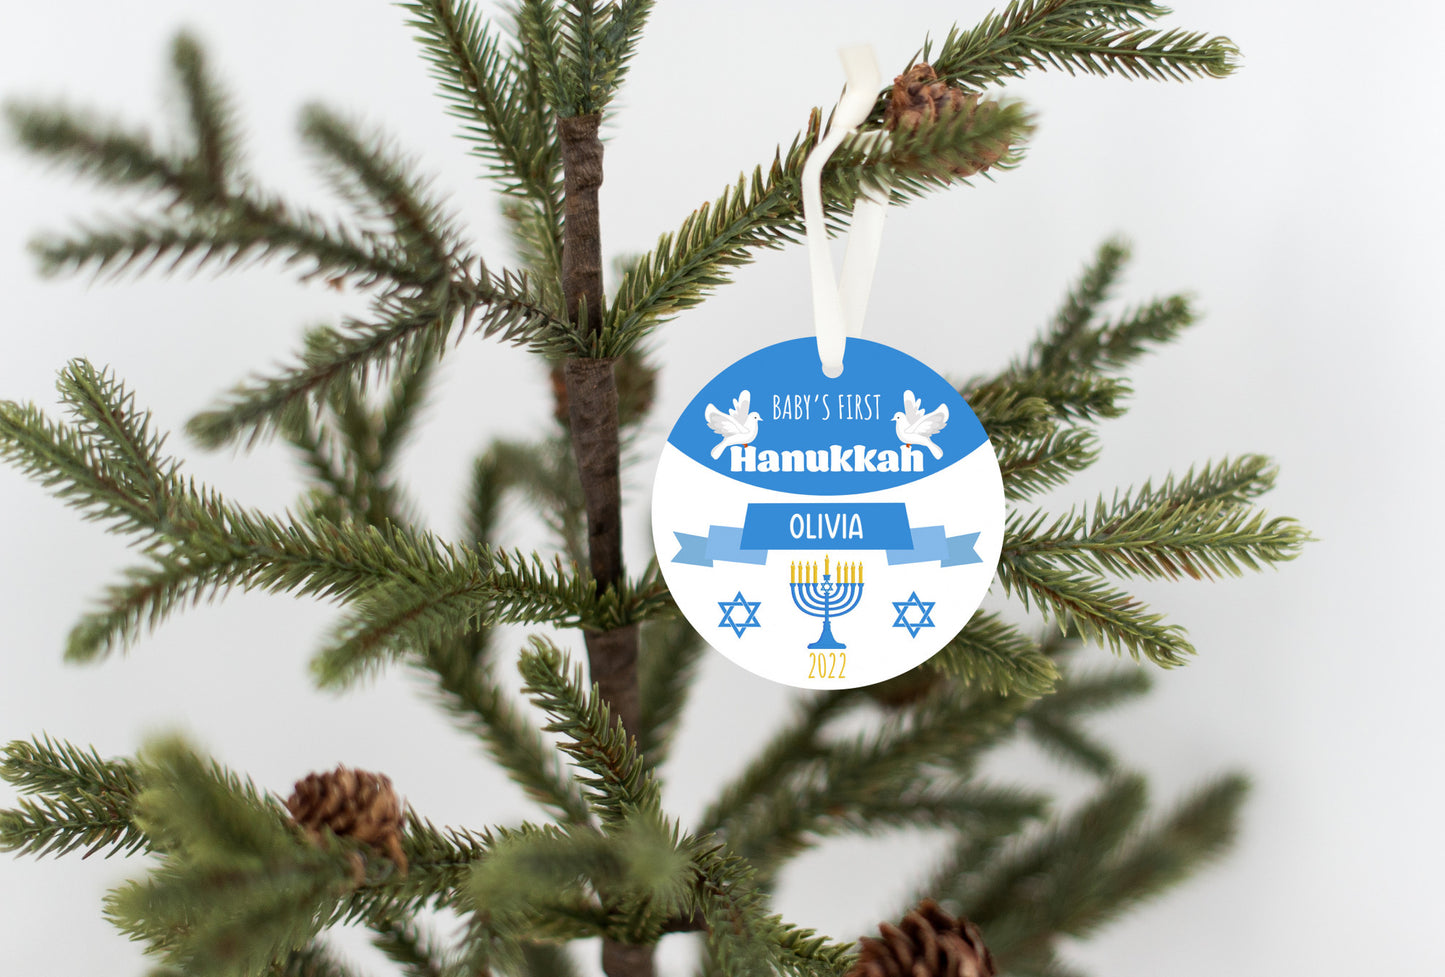 Personalized Baby's First Hannukkah 2022 Ornament